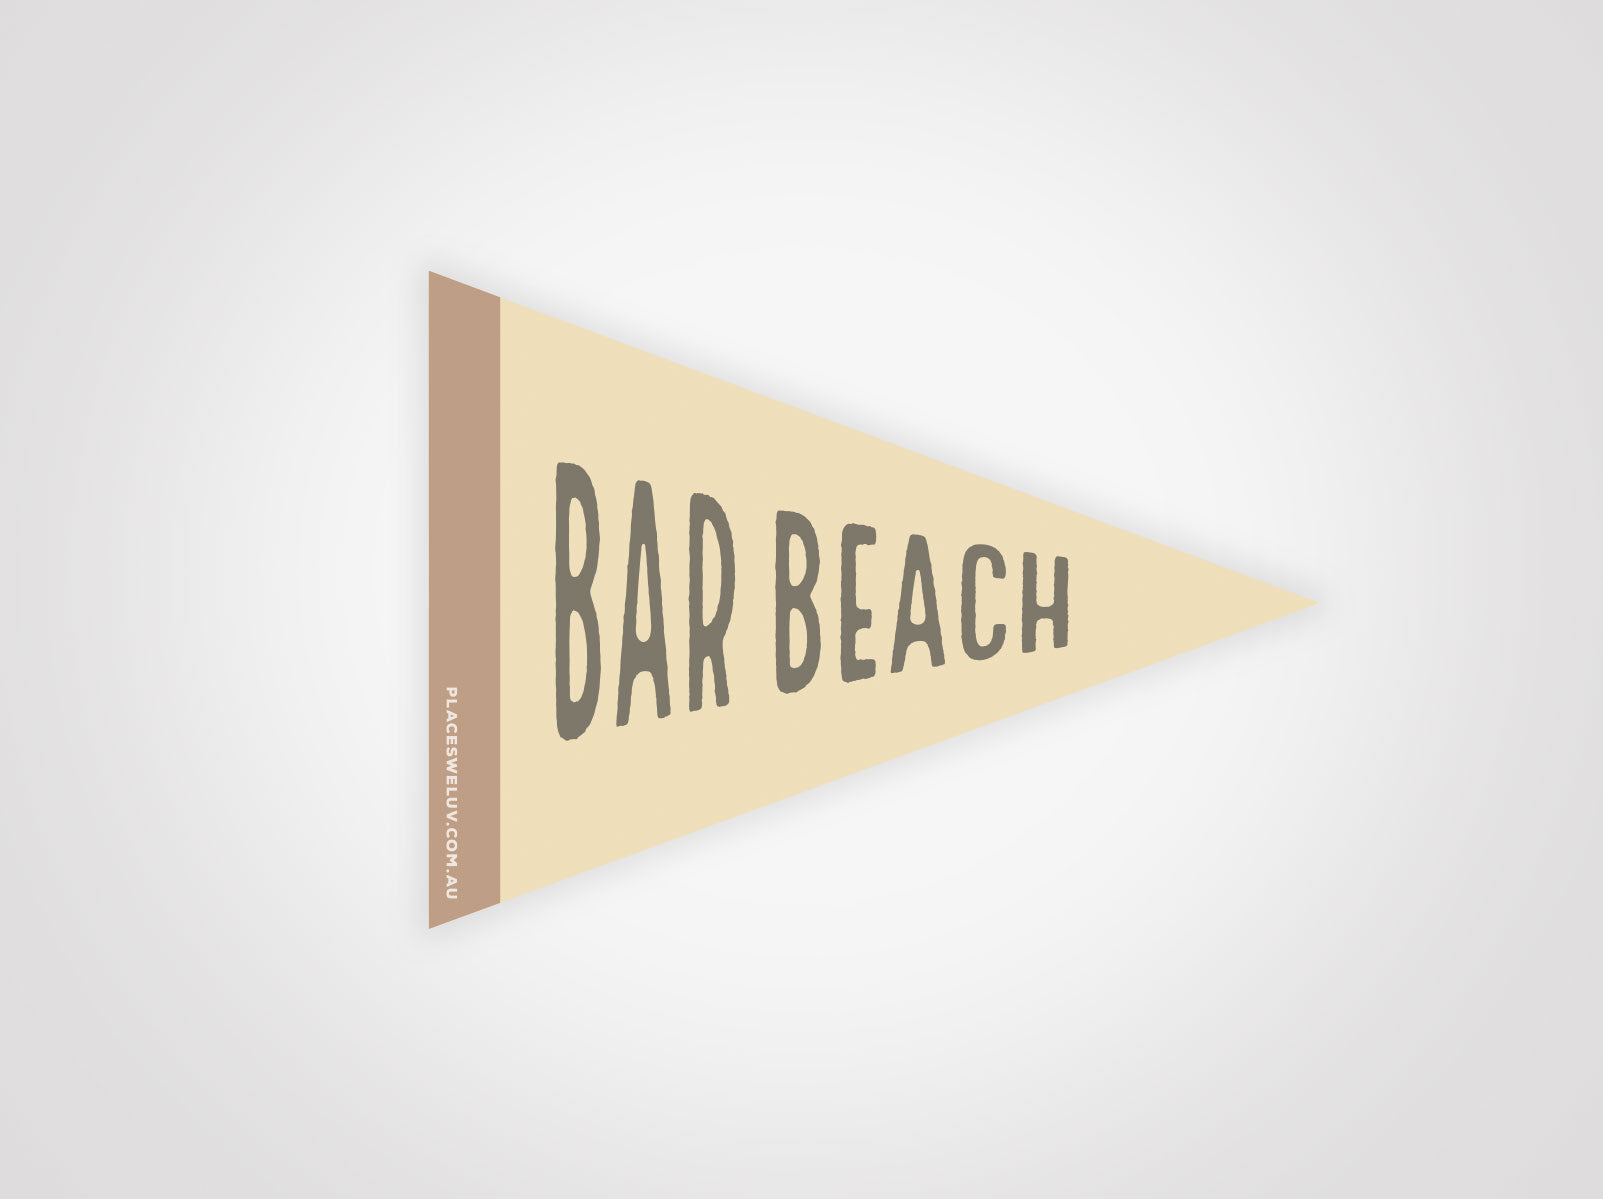 Bar Beach retro travel flag decal by places we luv